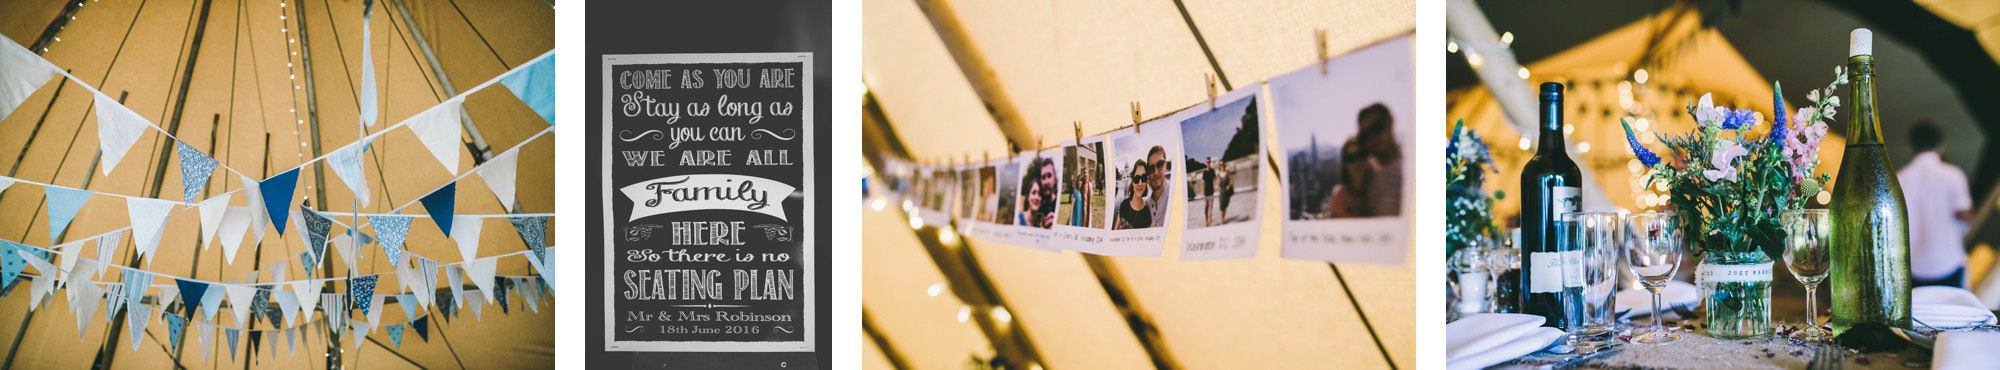 tipi-wedding-in-diss-norfolk-by-james-powell-photography-017